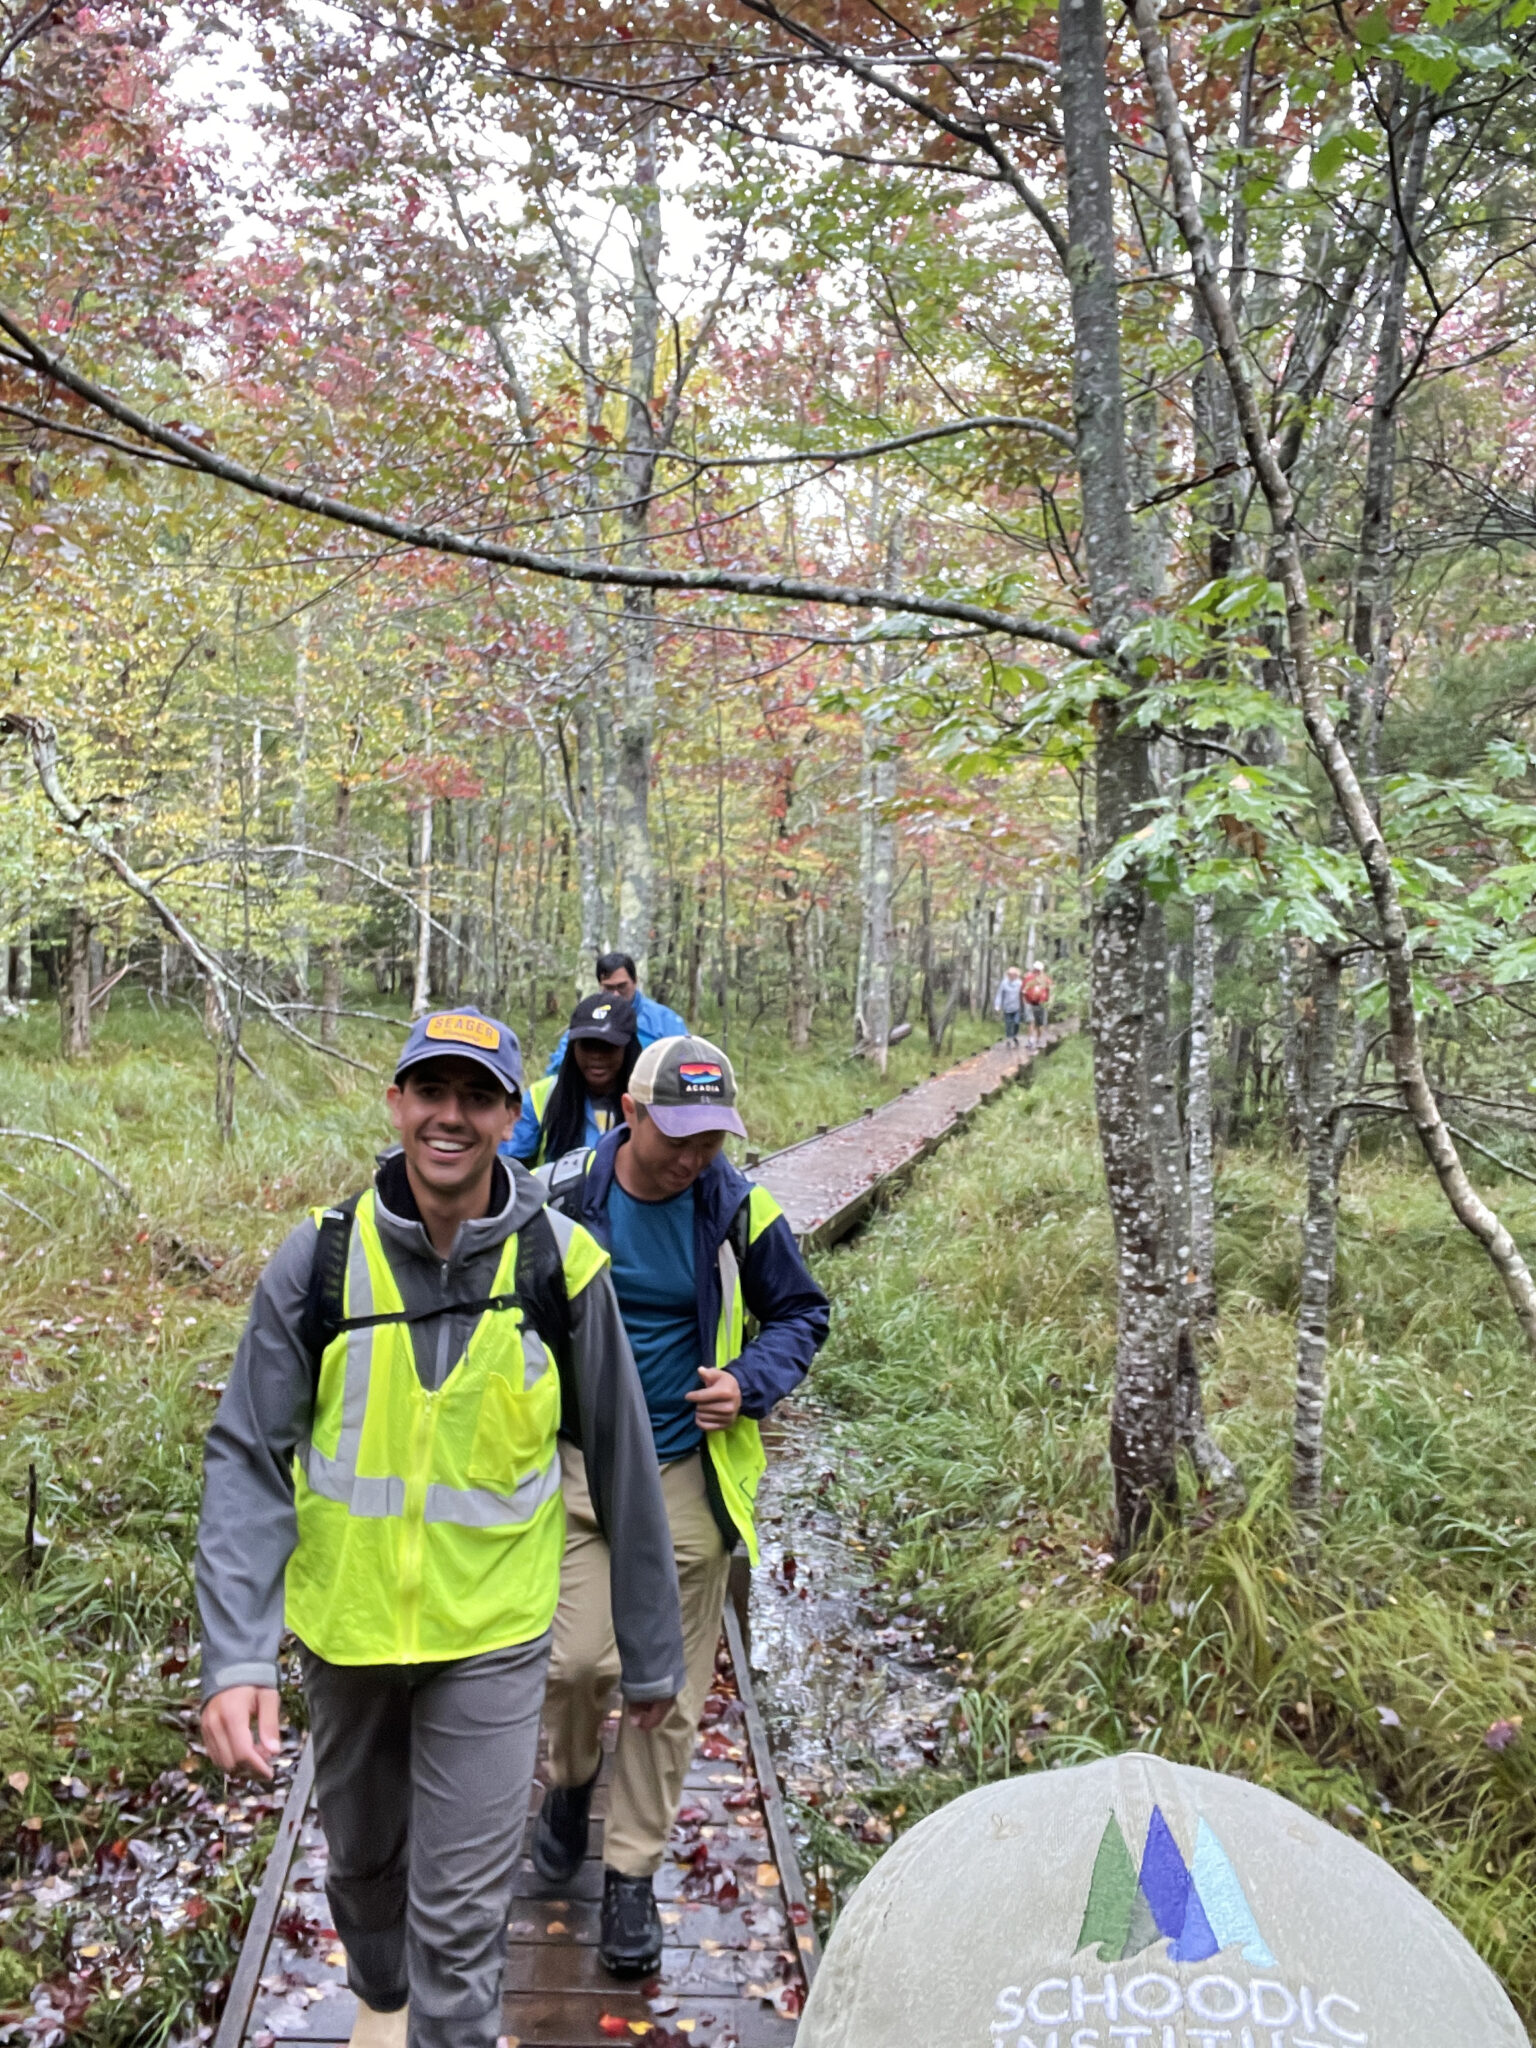 Earthwatch volunteers walk along the Jessup Trail to collect biodiversity data.